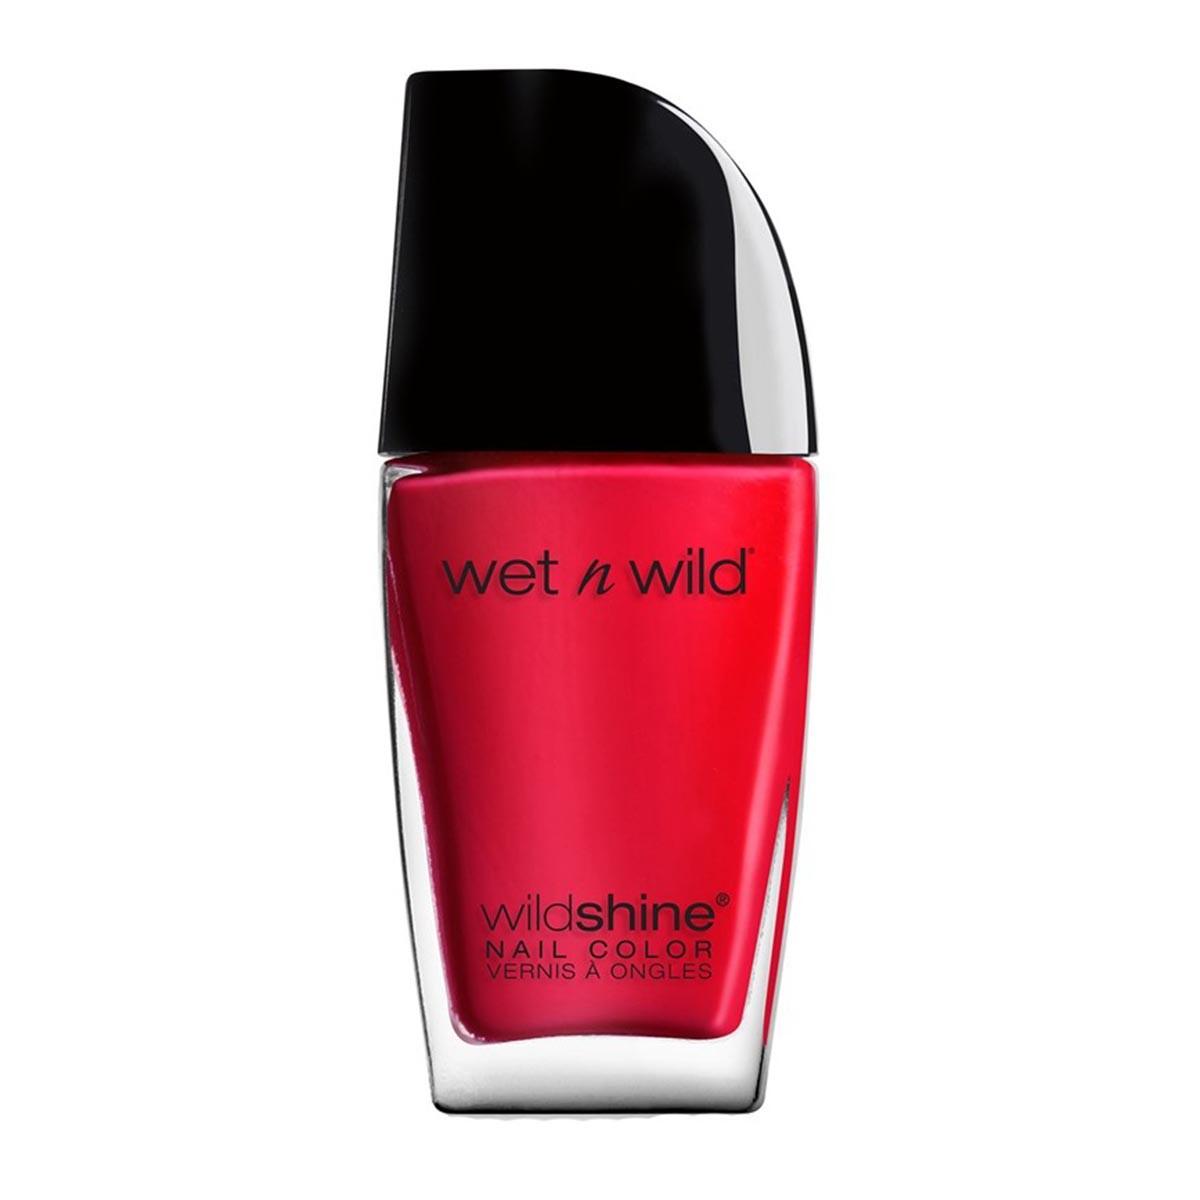 wet-n-wild-wildshine-nail-color-red-red